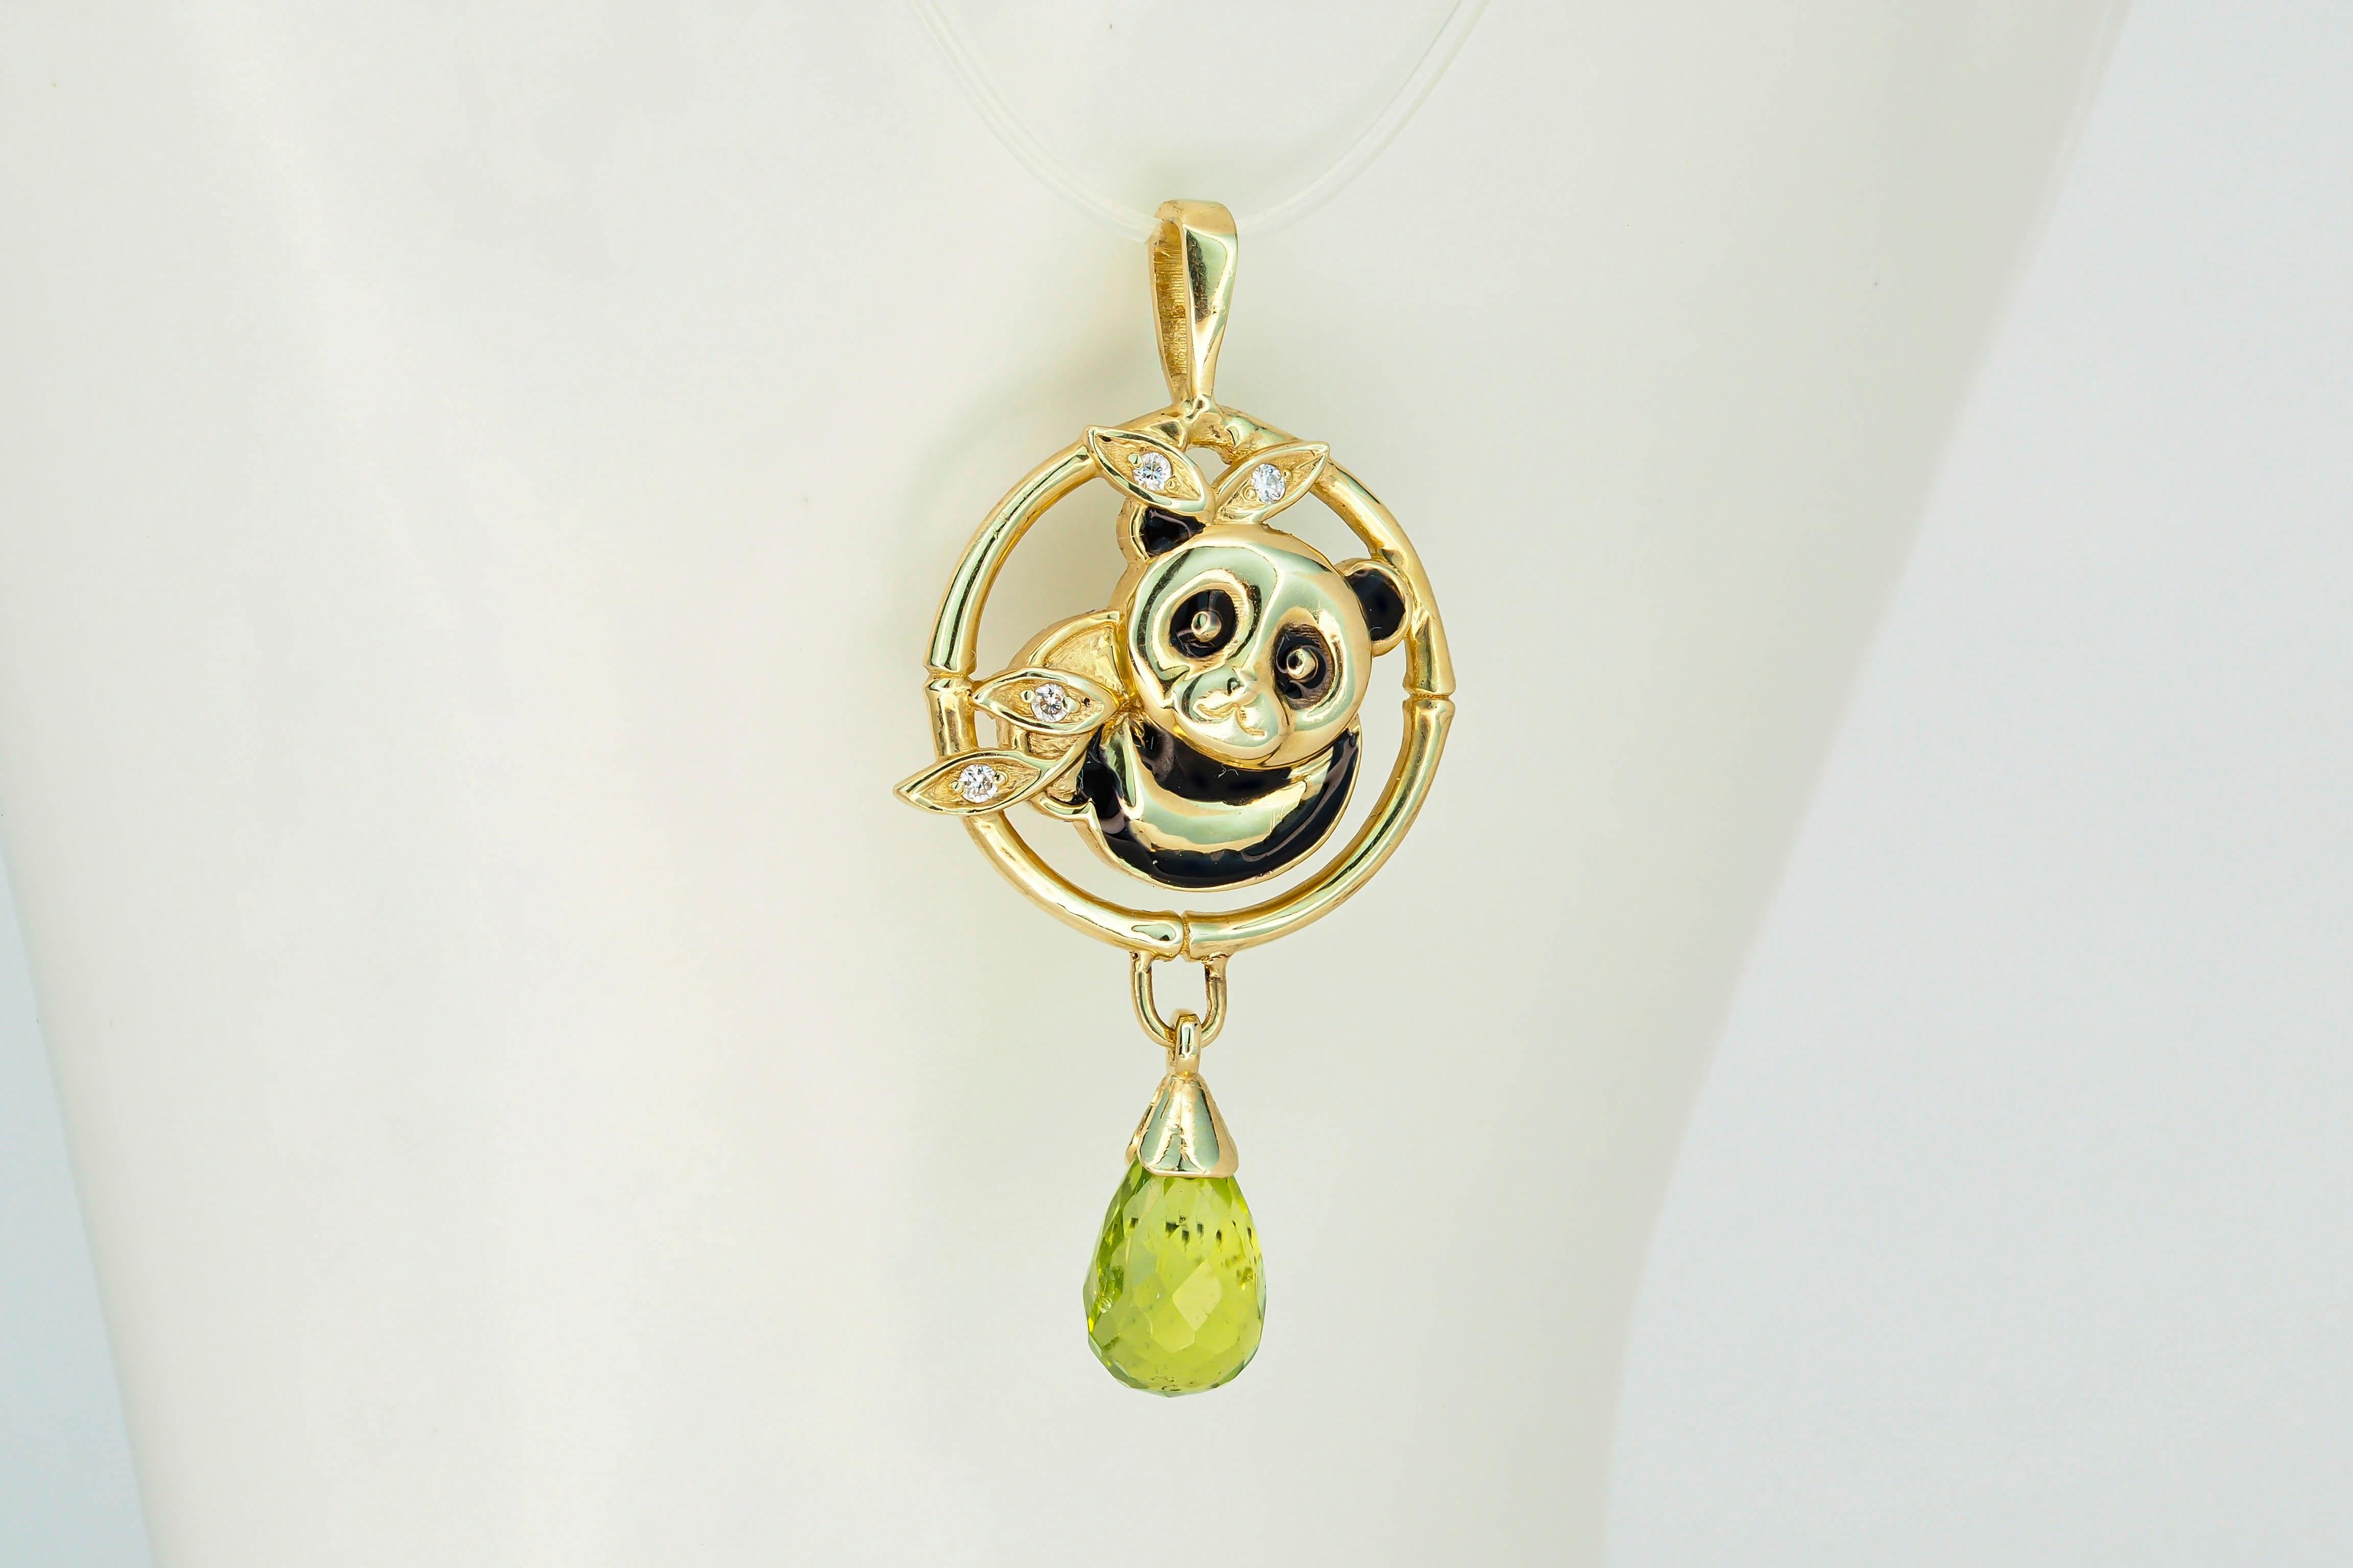 14 kt solid gold Koala Bear pendant with natural peridot and diamonds. August birthstone.  Briolette peridot pendant. Animal jewelry
Metal: 14kt solid gold
Pendant size: 32.35 x 15.5 mm.
Weight: 1.8 g.

Gemstones:
Natural peridot: 1 piece, weight - 